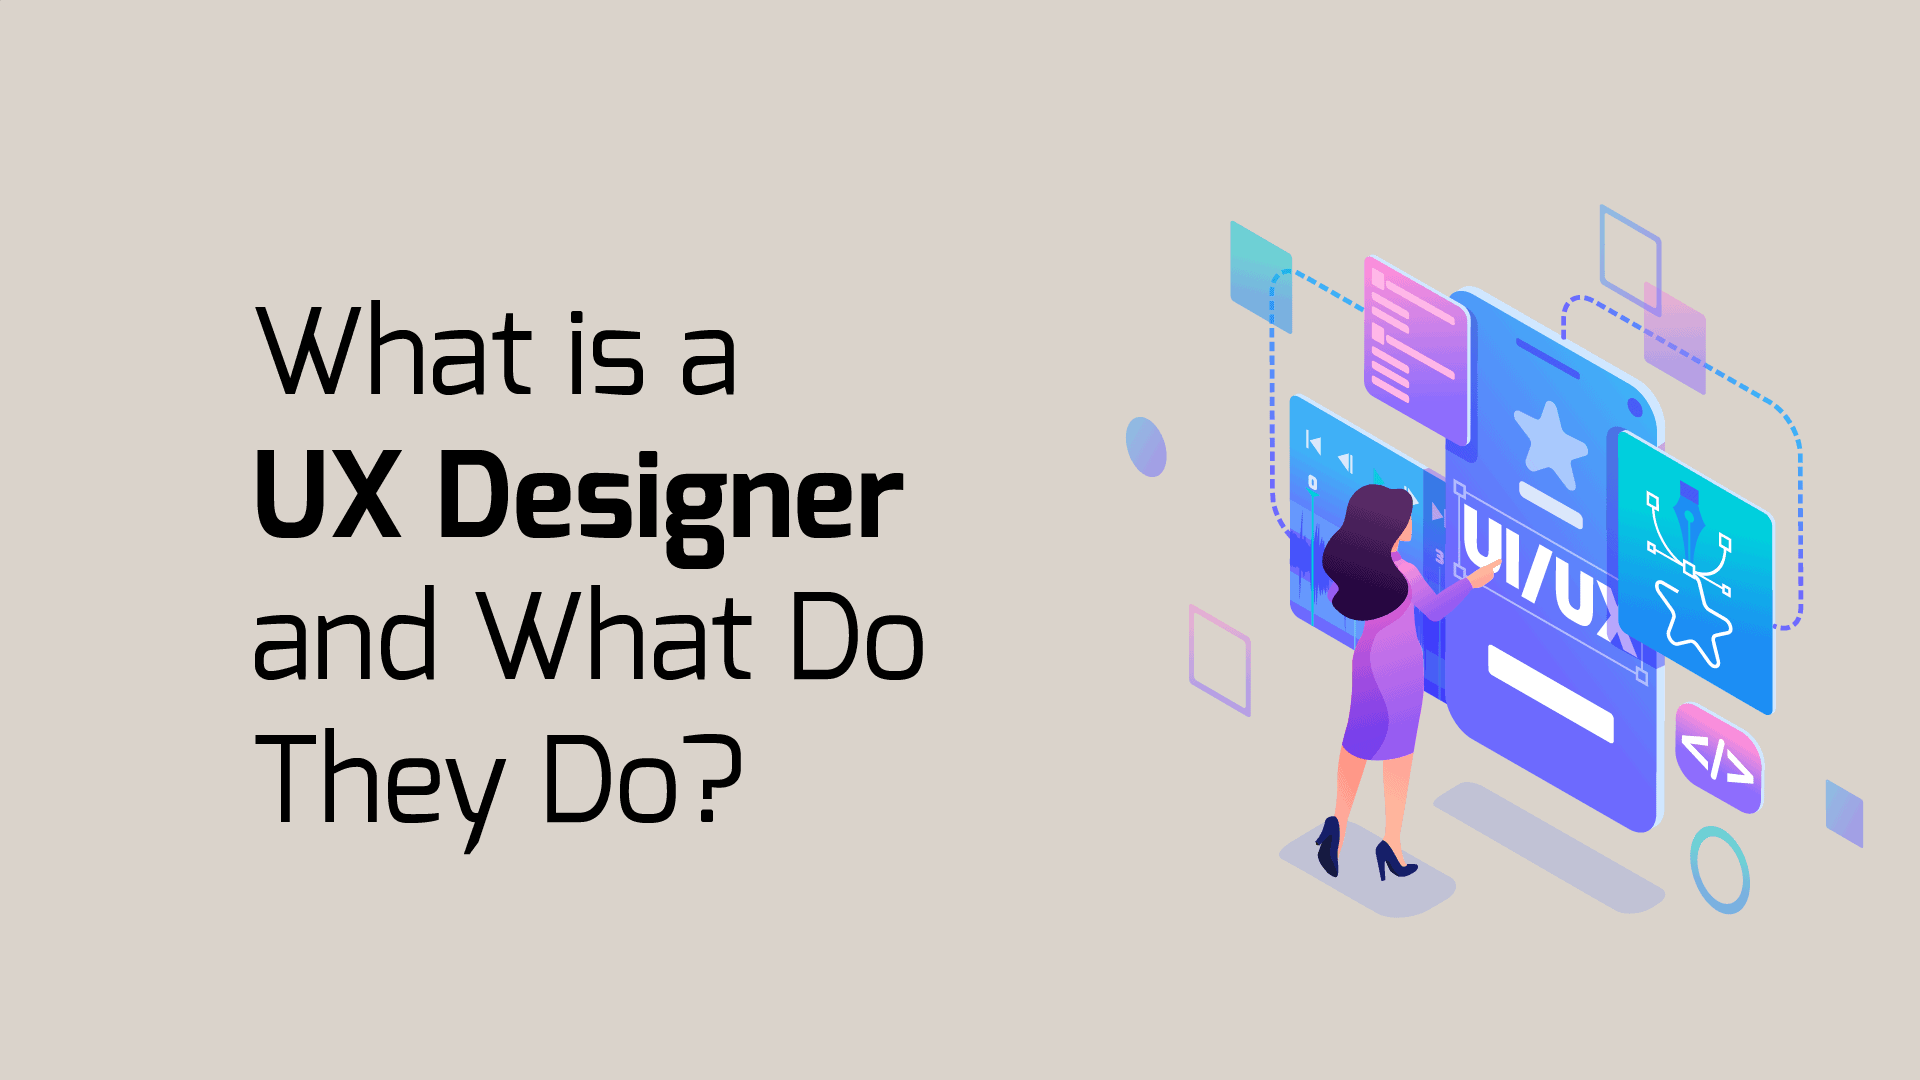 What is a UX Designer and What Do They Do?